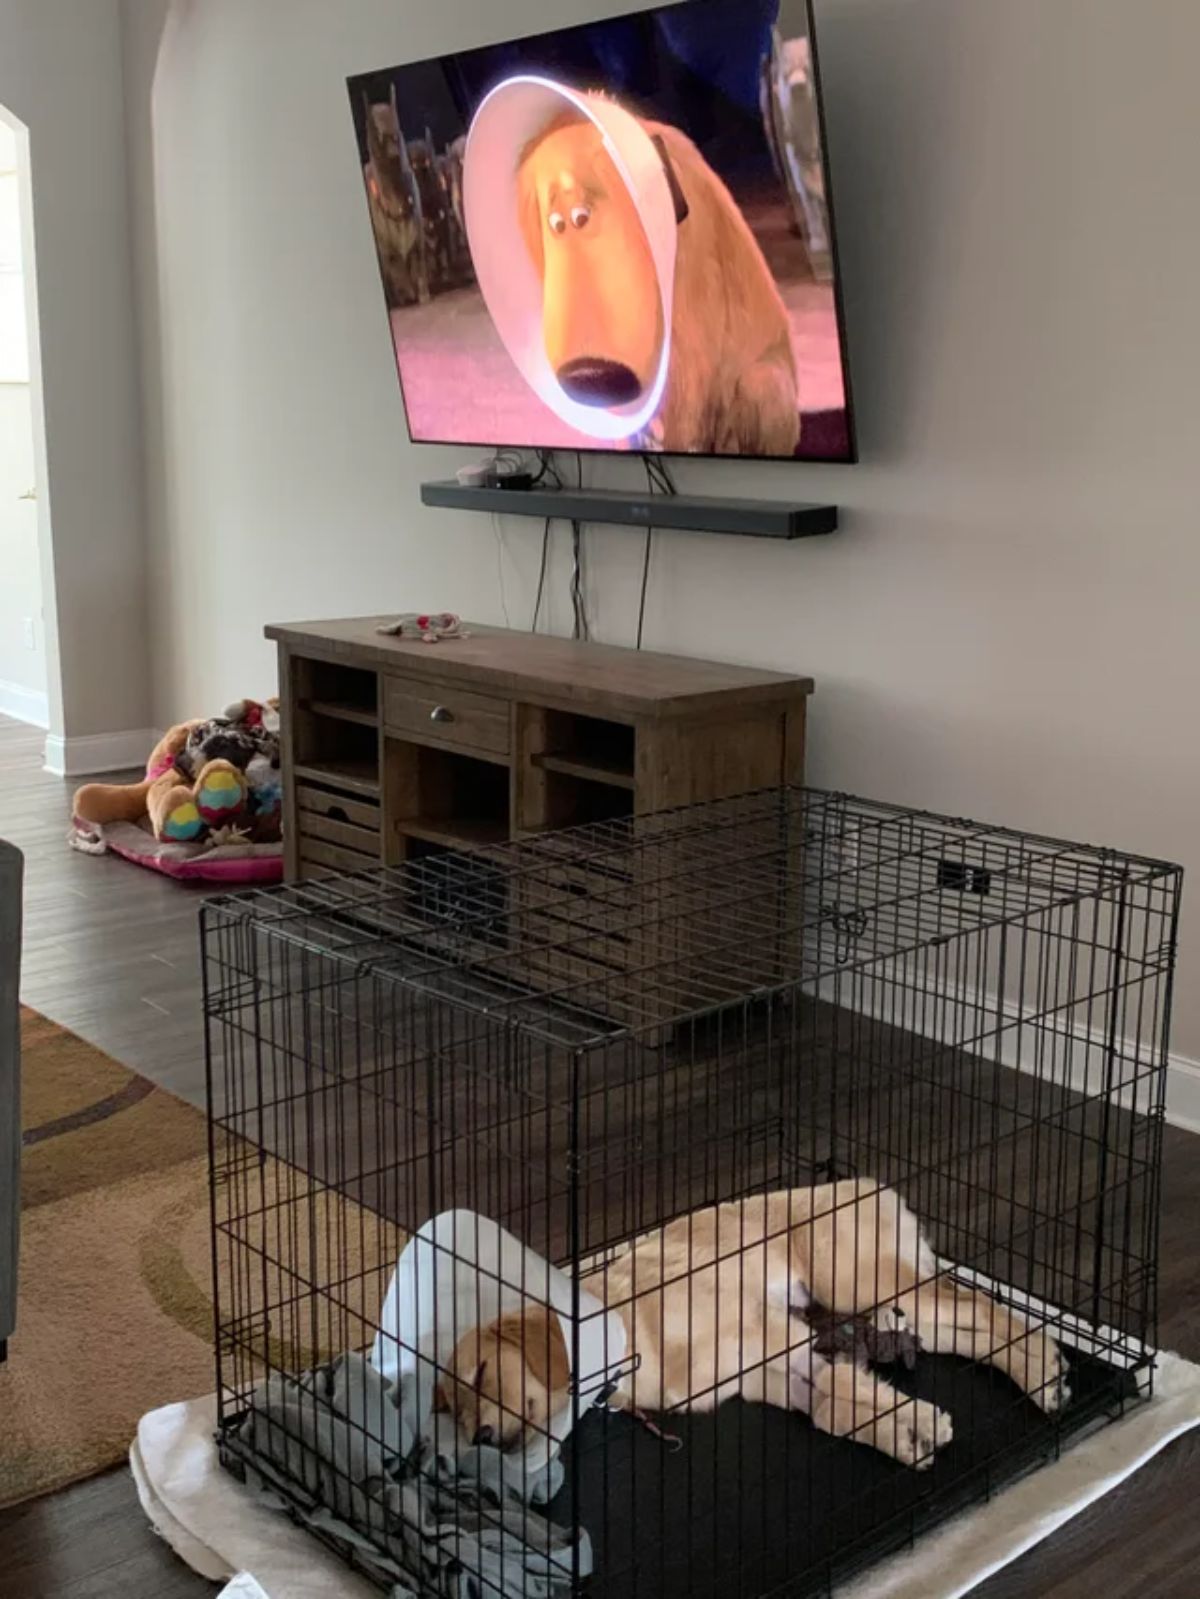 golden retriever puppy wearing cone of shame laying sideways in a black crate with a brown dog in a cone of shame on a tv